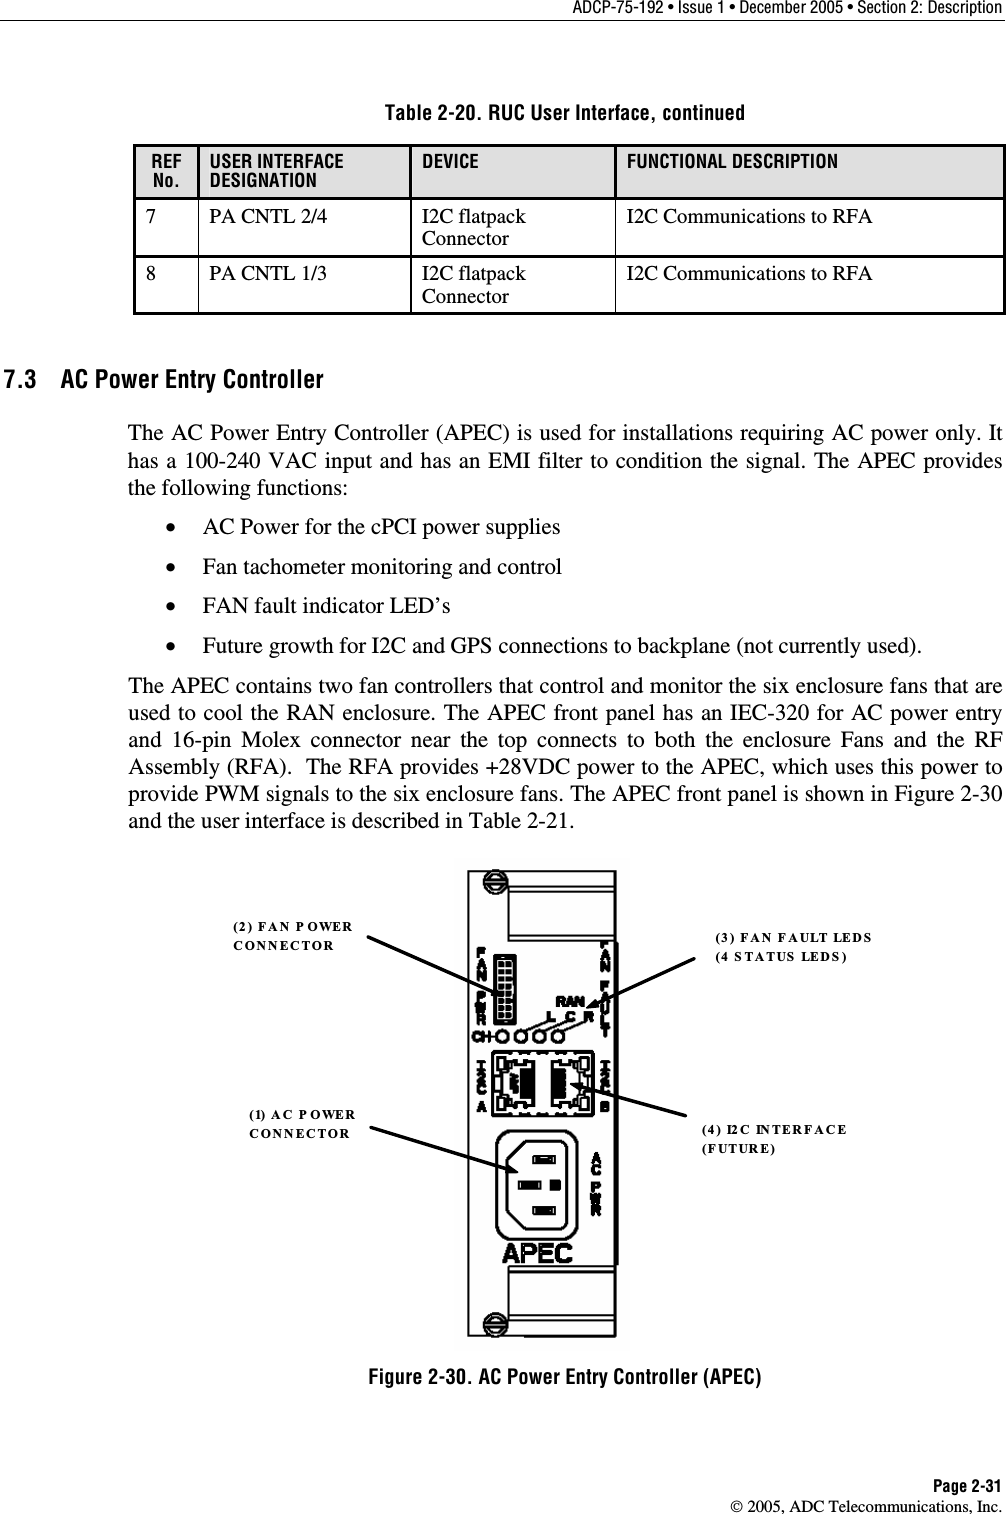 ADCP-75-192 • Issue 1 • December 2005 • Section 2: Description Page 2-31  2005, ADC Telecommunications, Inc. Table 2-20. RUC User Interface, continued REFNo. USER INTERFACE DESIGNATION DEVICE  FUNCTIONAL DESCRIPTION 7  PA CNTL 2/4  I2C flatpack Connector I2C Communications to RFA 8  PA CNTL 1/3  I2C flatpack Connector I2C Communications to RFA  7.3  AC Power Entry Controller The AC Power Entry Controller (APEC) is used for installations requiring AC power only. It has a 100-240 VAC input and has an EMI filter to condition the signal. The APEC provides the following functions: •  AC Power for the cPCI power supplies •  Fan tachometer monitoring and control •  FAN fault indicator LED’s •  Future growth for I2C and GPS connections to backplane (not currently used). The APEC contains two fan controllers that control and monitor the six enclosure fans that are used to cool the RAN enclosure. The APEC front panel has an IEC-320 for AC power entry and 16-pin Molex connector near the top connects to both the enclosure Fans and the RF Assembly (RFA).  The RFA provides +28VDC power to the APEC, which uses this power to provide PWM signals to the six enclosure fans. The APEC front panel is shown in Figure 2-30 and the user interface is described in Table 2-21.  (2) FAN POWER CONNECTOR (3) FAN FAULT LEDS (4 STATUS LEDS)(4) I2C INTERFACE (FUTURE)(1) AC P OWER CONNECTOR Figure 2-30. AC Power Entry Controller (APEC) 